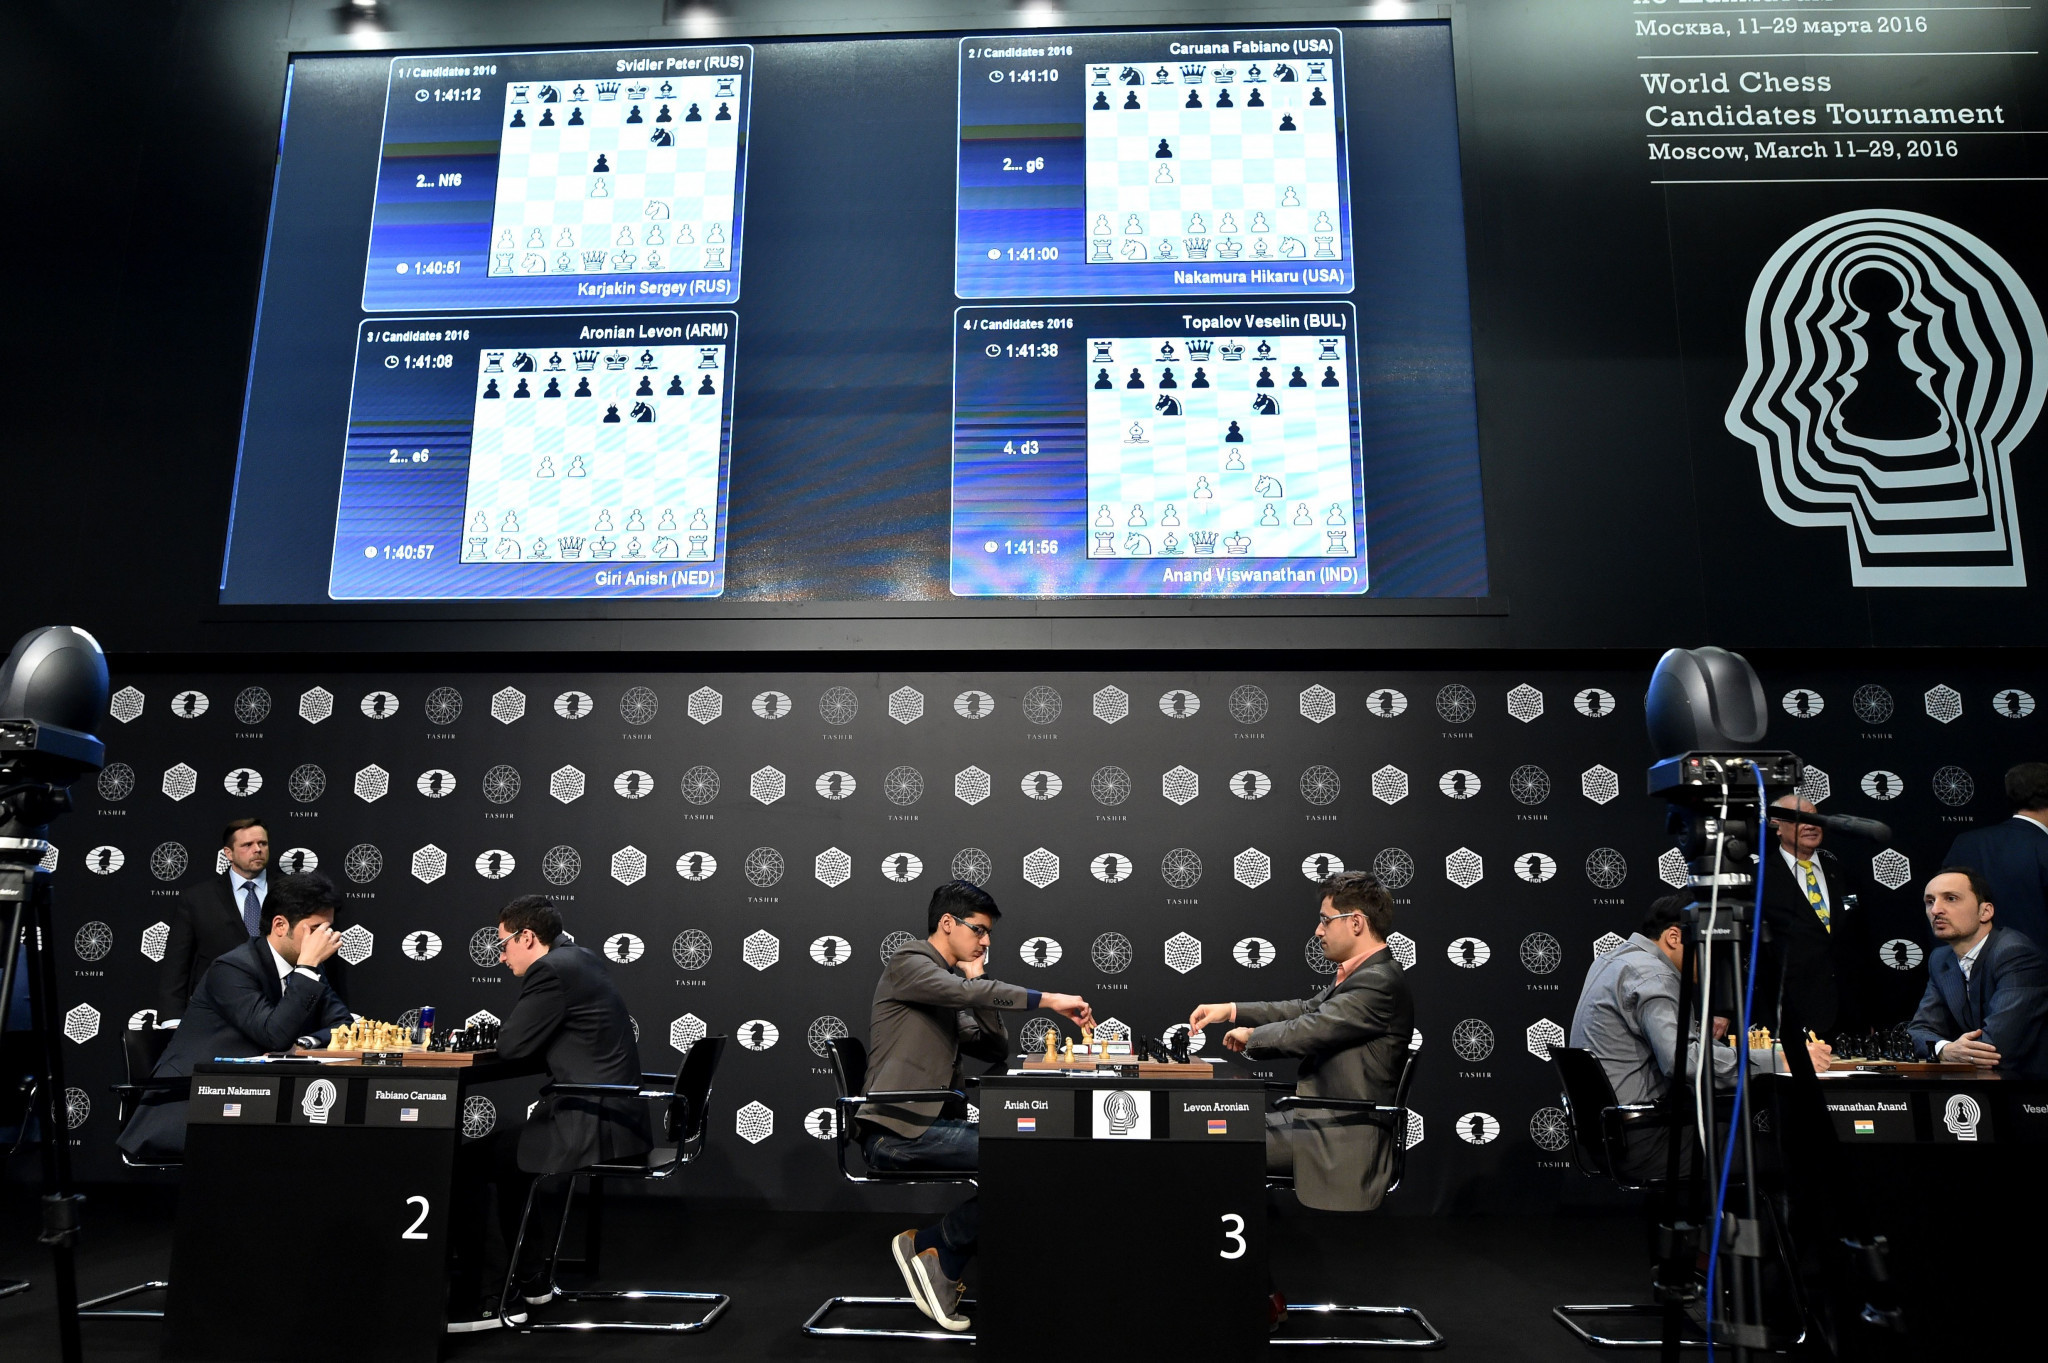  Opening matches take place in FIDE Candidates Tournament in Berlin